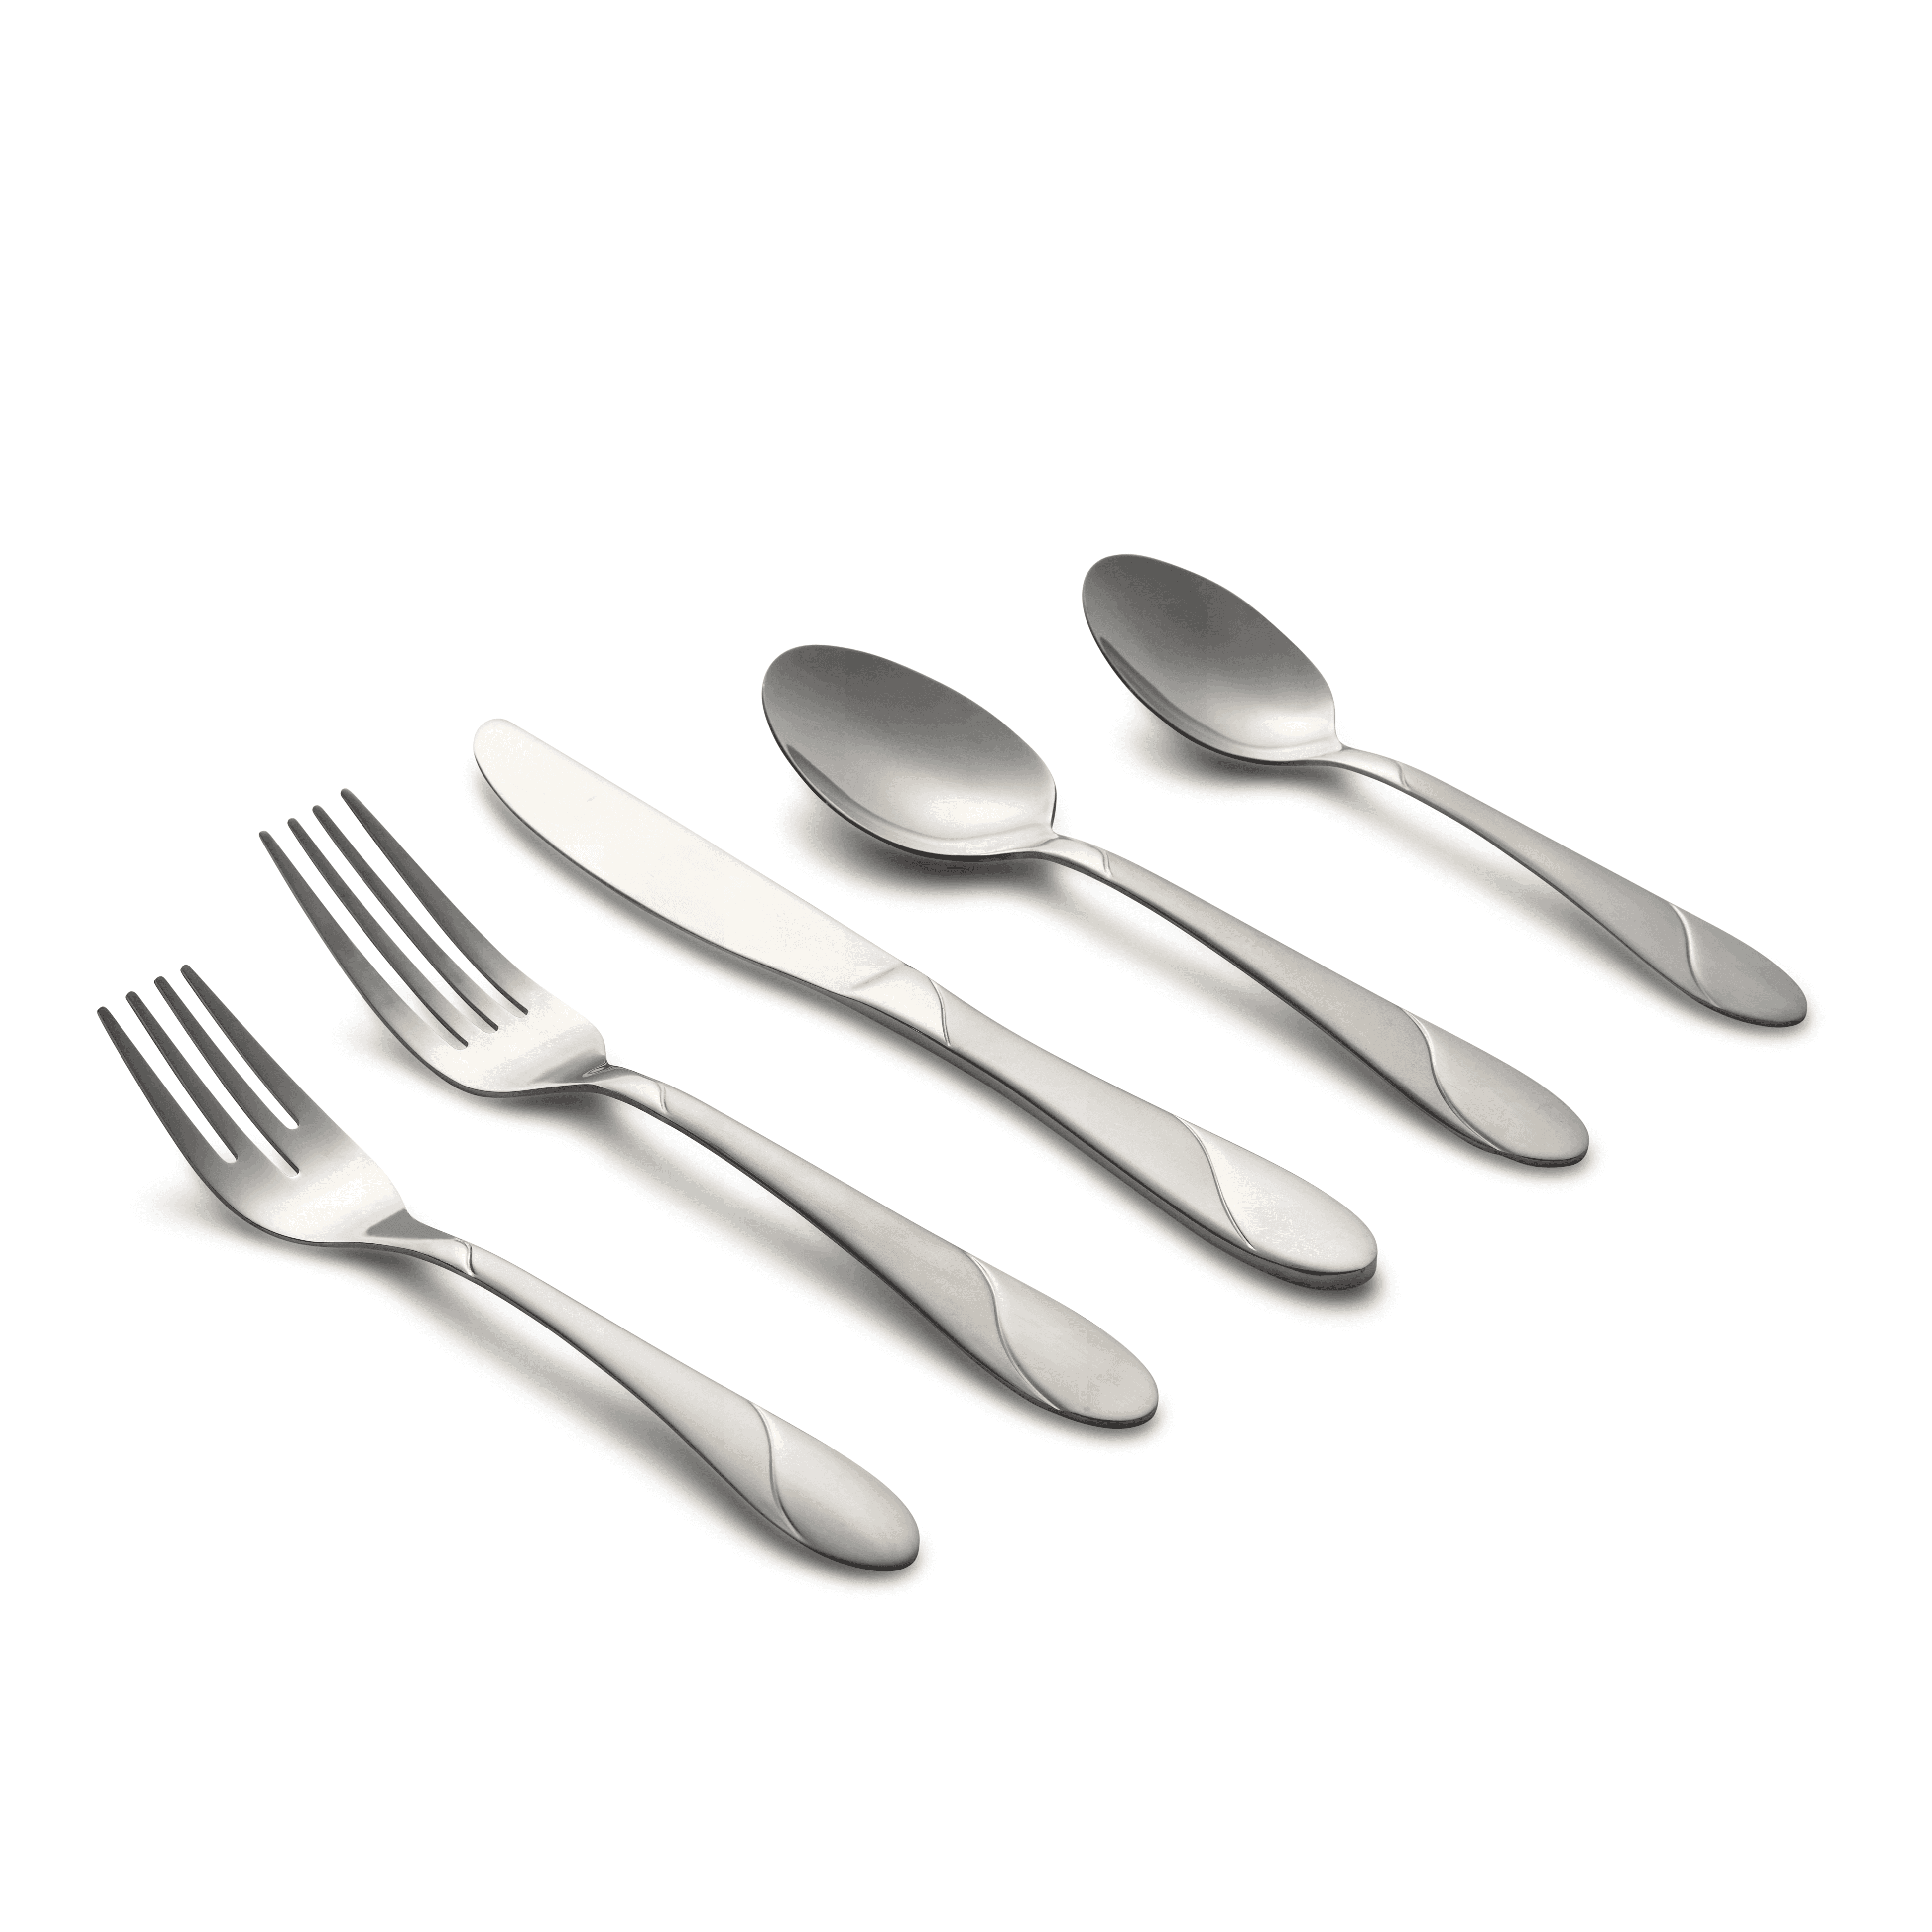 Service for 4 Cambridge Silversmiths Inc 293420HCD12 Cambridge Silversmiths Flatty Mirror 20-Piece Flatware Set 18/10 Stainless Steel